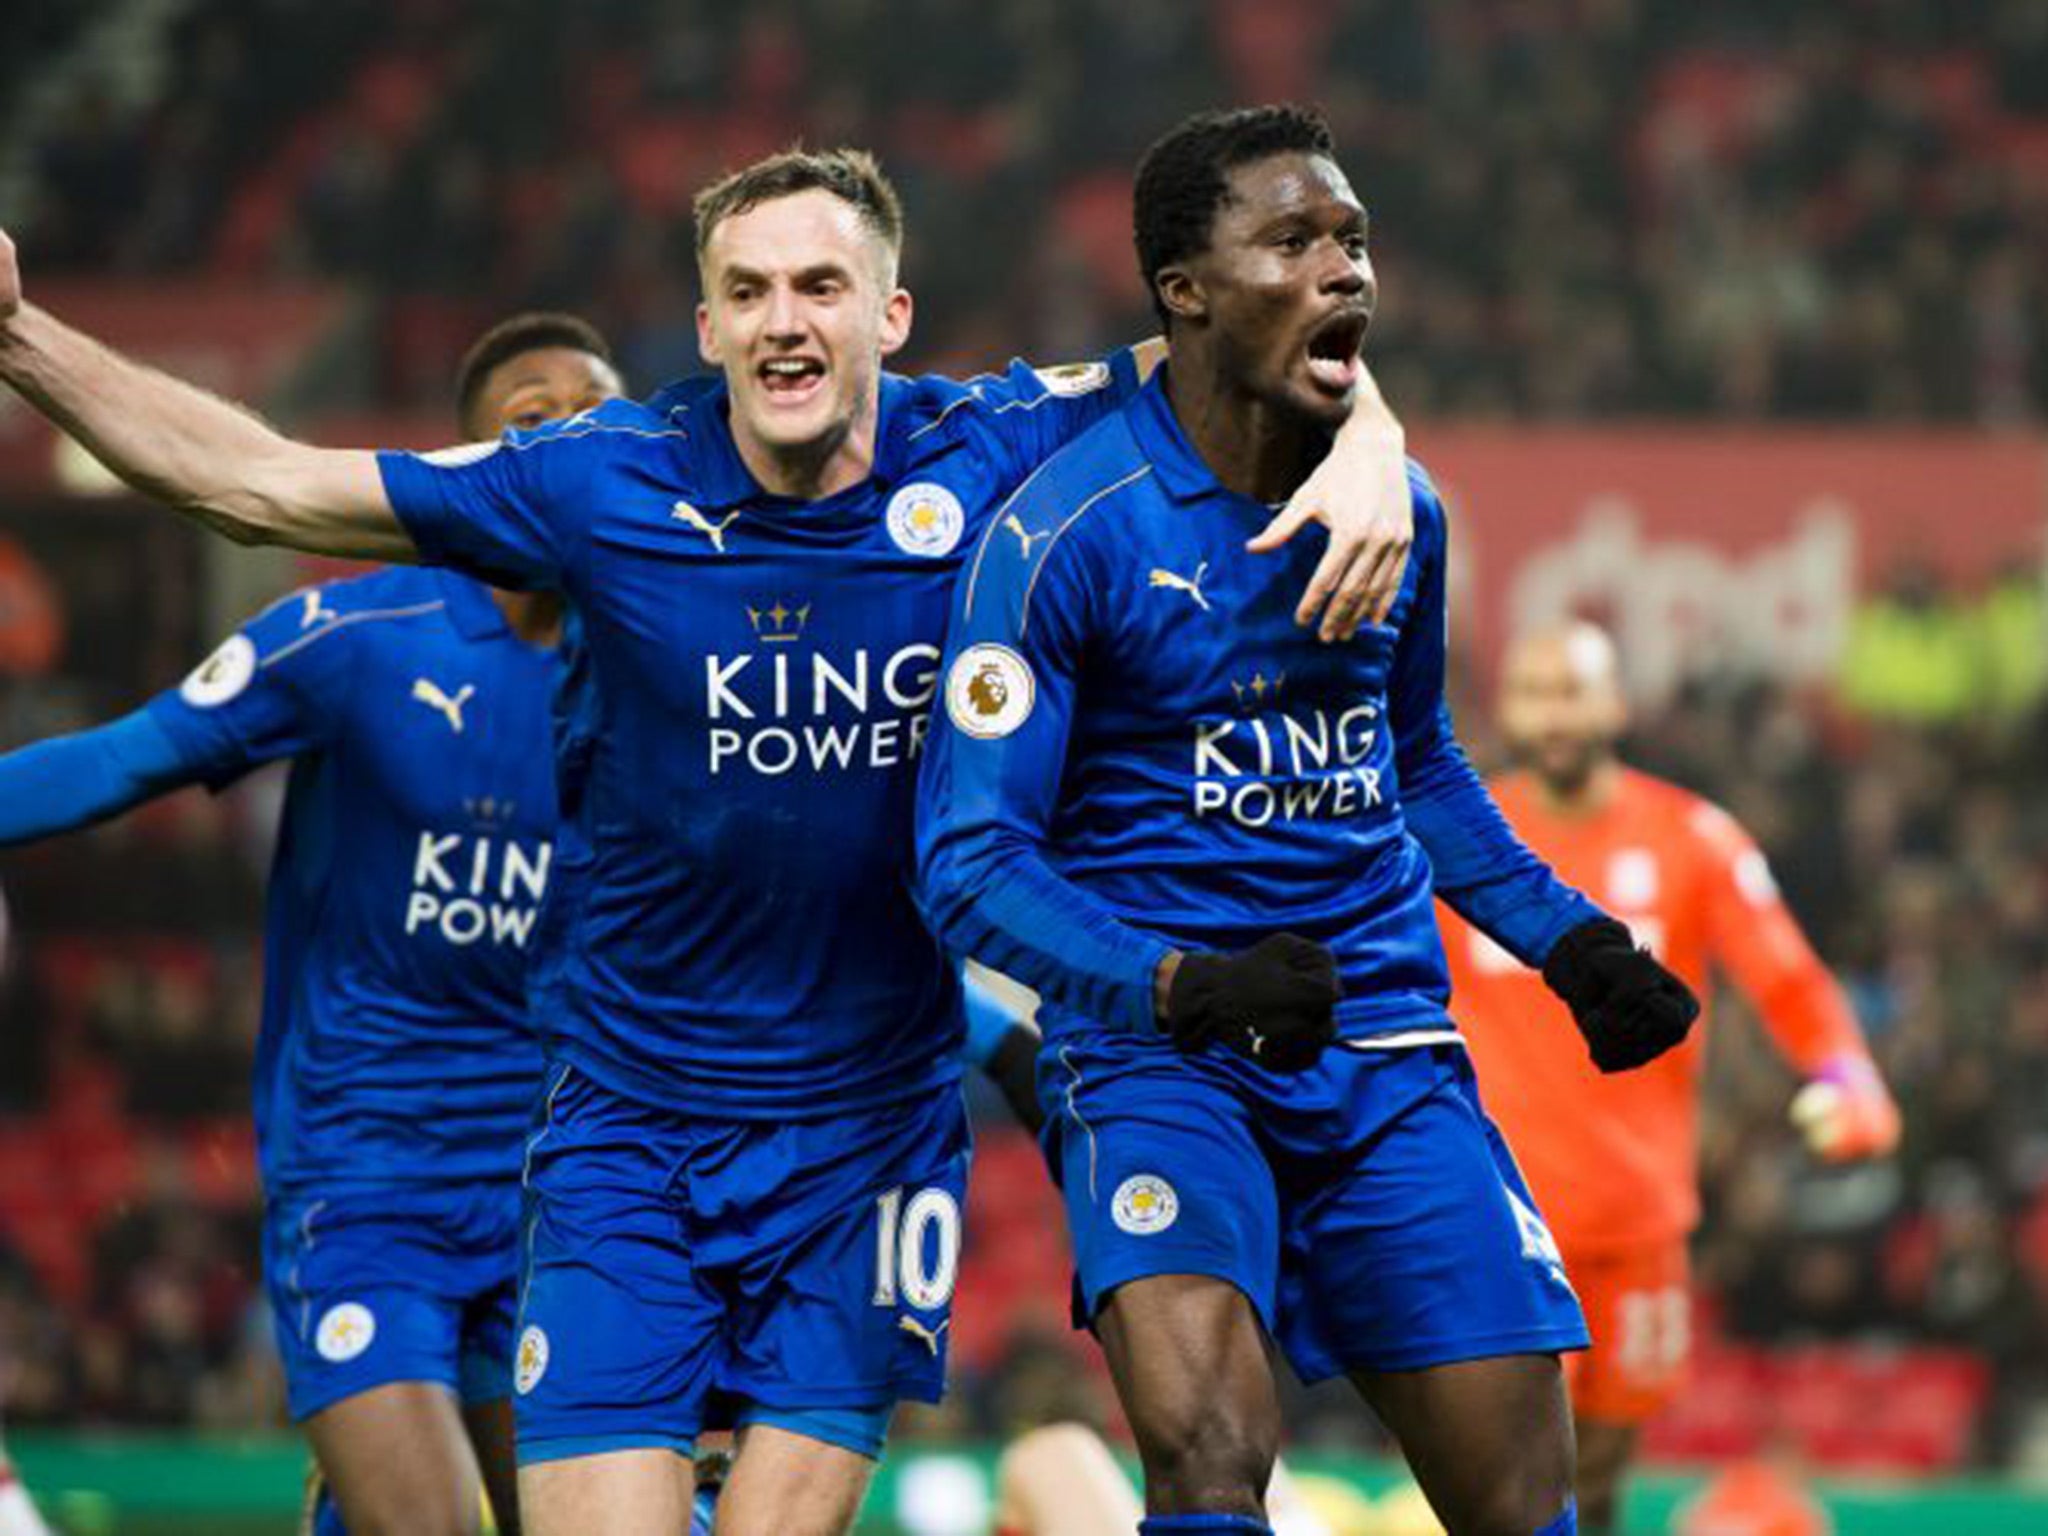 Amartey headed home to snatch an unlikely point for 10-man Leicester